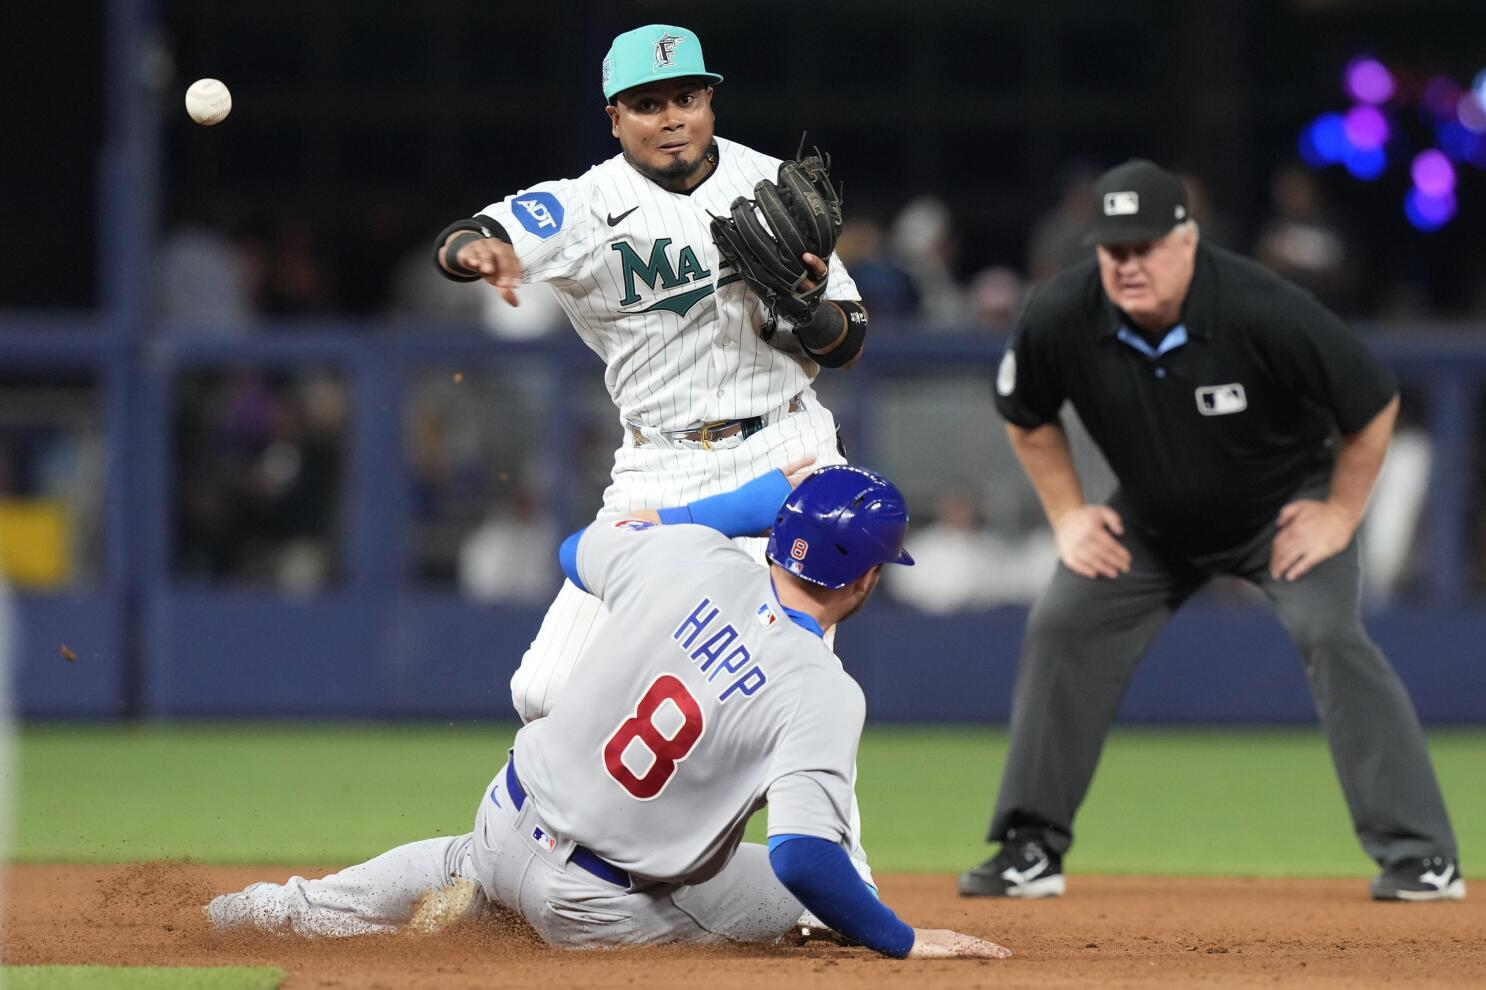 Miami Marlins' Jean Segura (9) hits a single to score the winning run  during the ninth inning of a baseball game against the Chicago Cubs,  Friday, April 28, 2023, in Miami. The